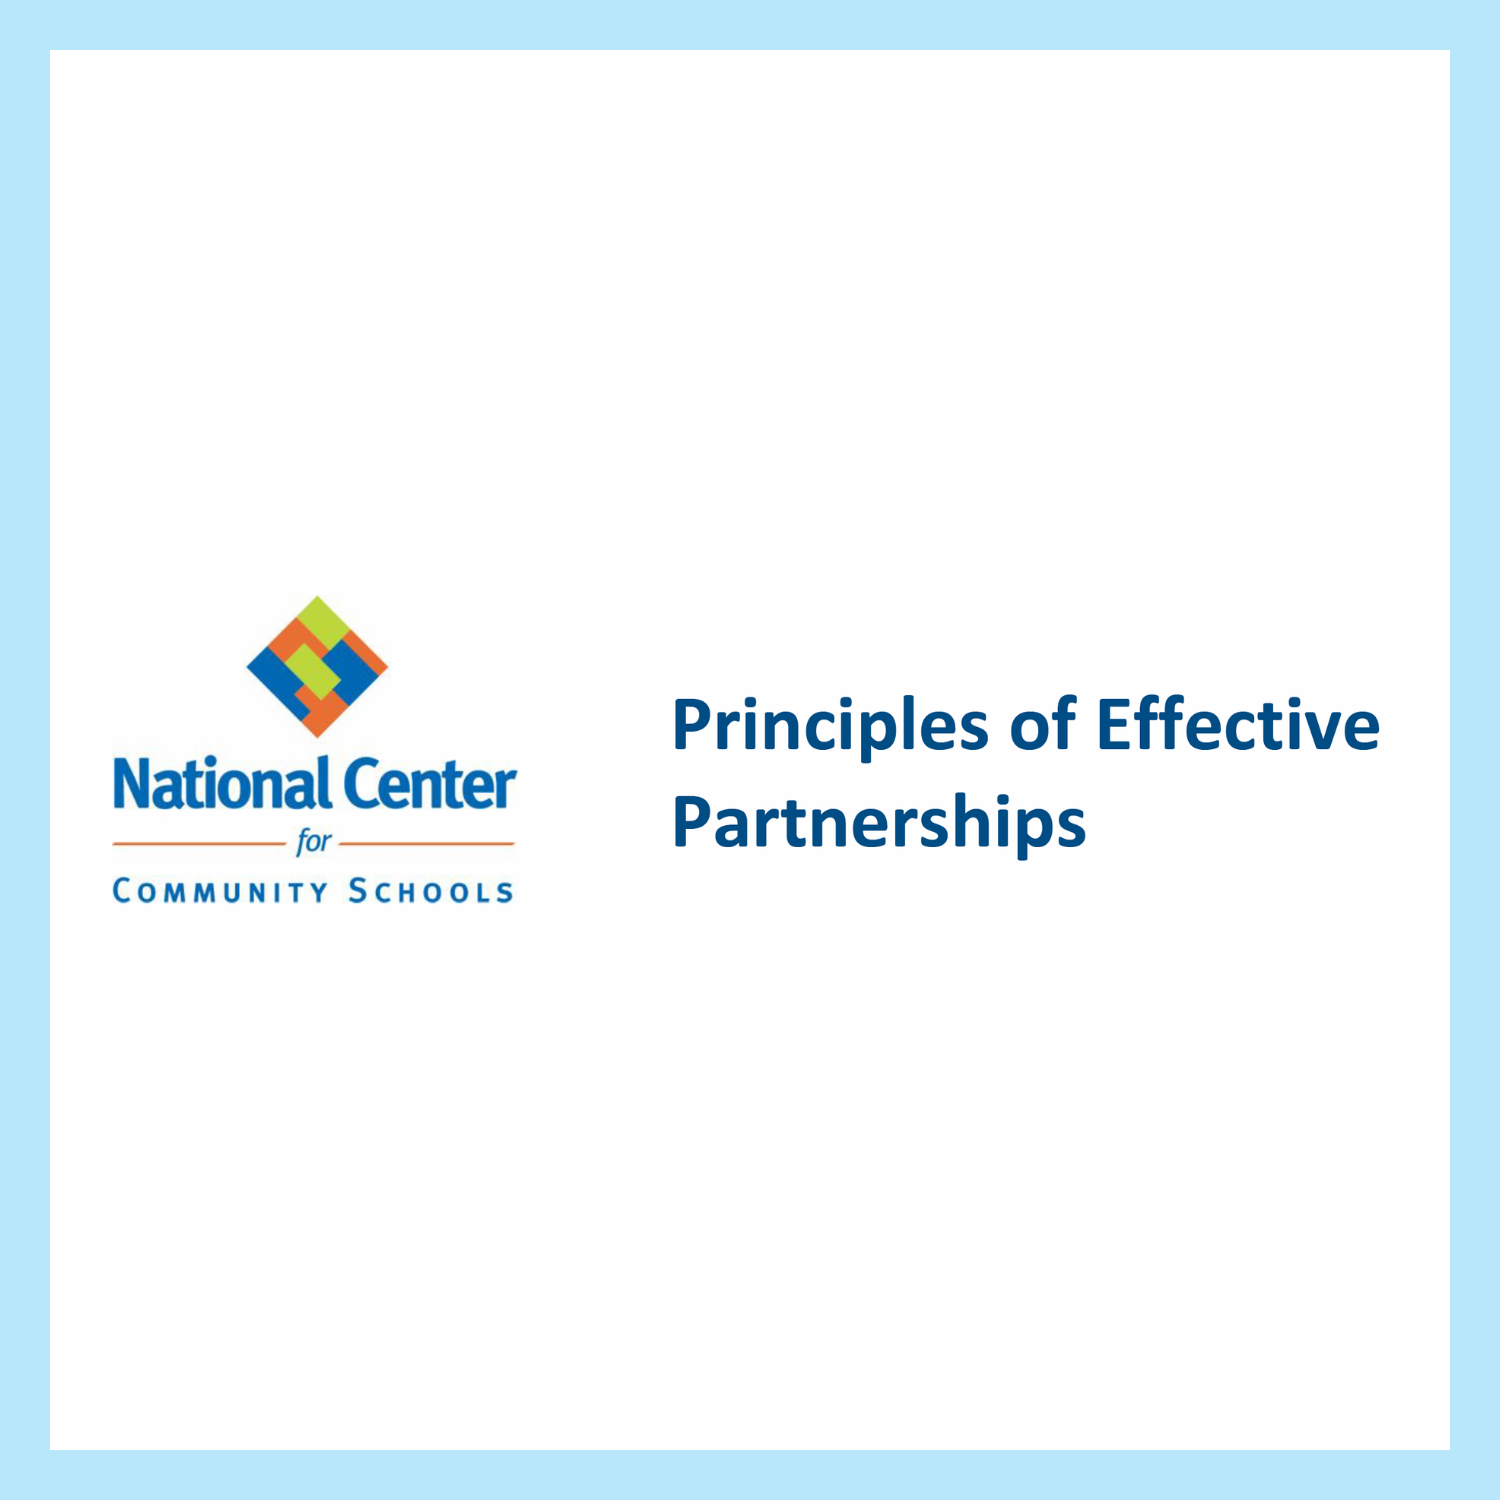    National Center for Community Schools logo with a colorful diamond above and "Principles of Effective Partnerships" written next to the logo.